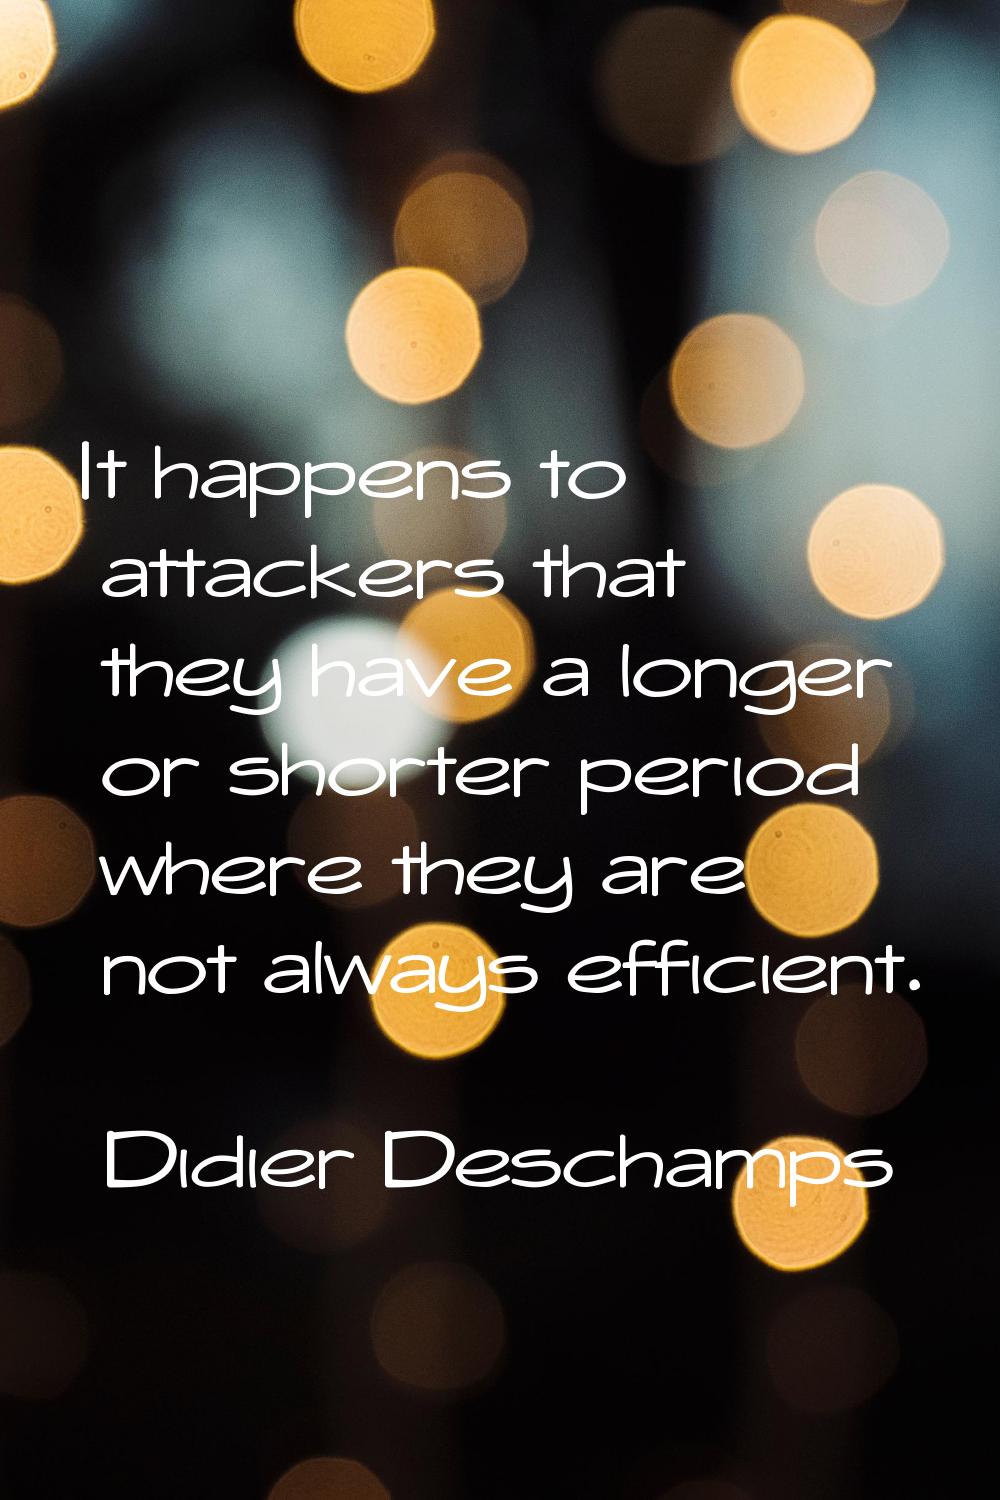 It happens to attackers that they have a longer or shorter period where they are not always efficie